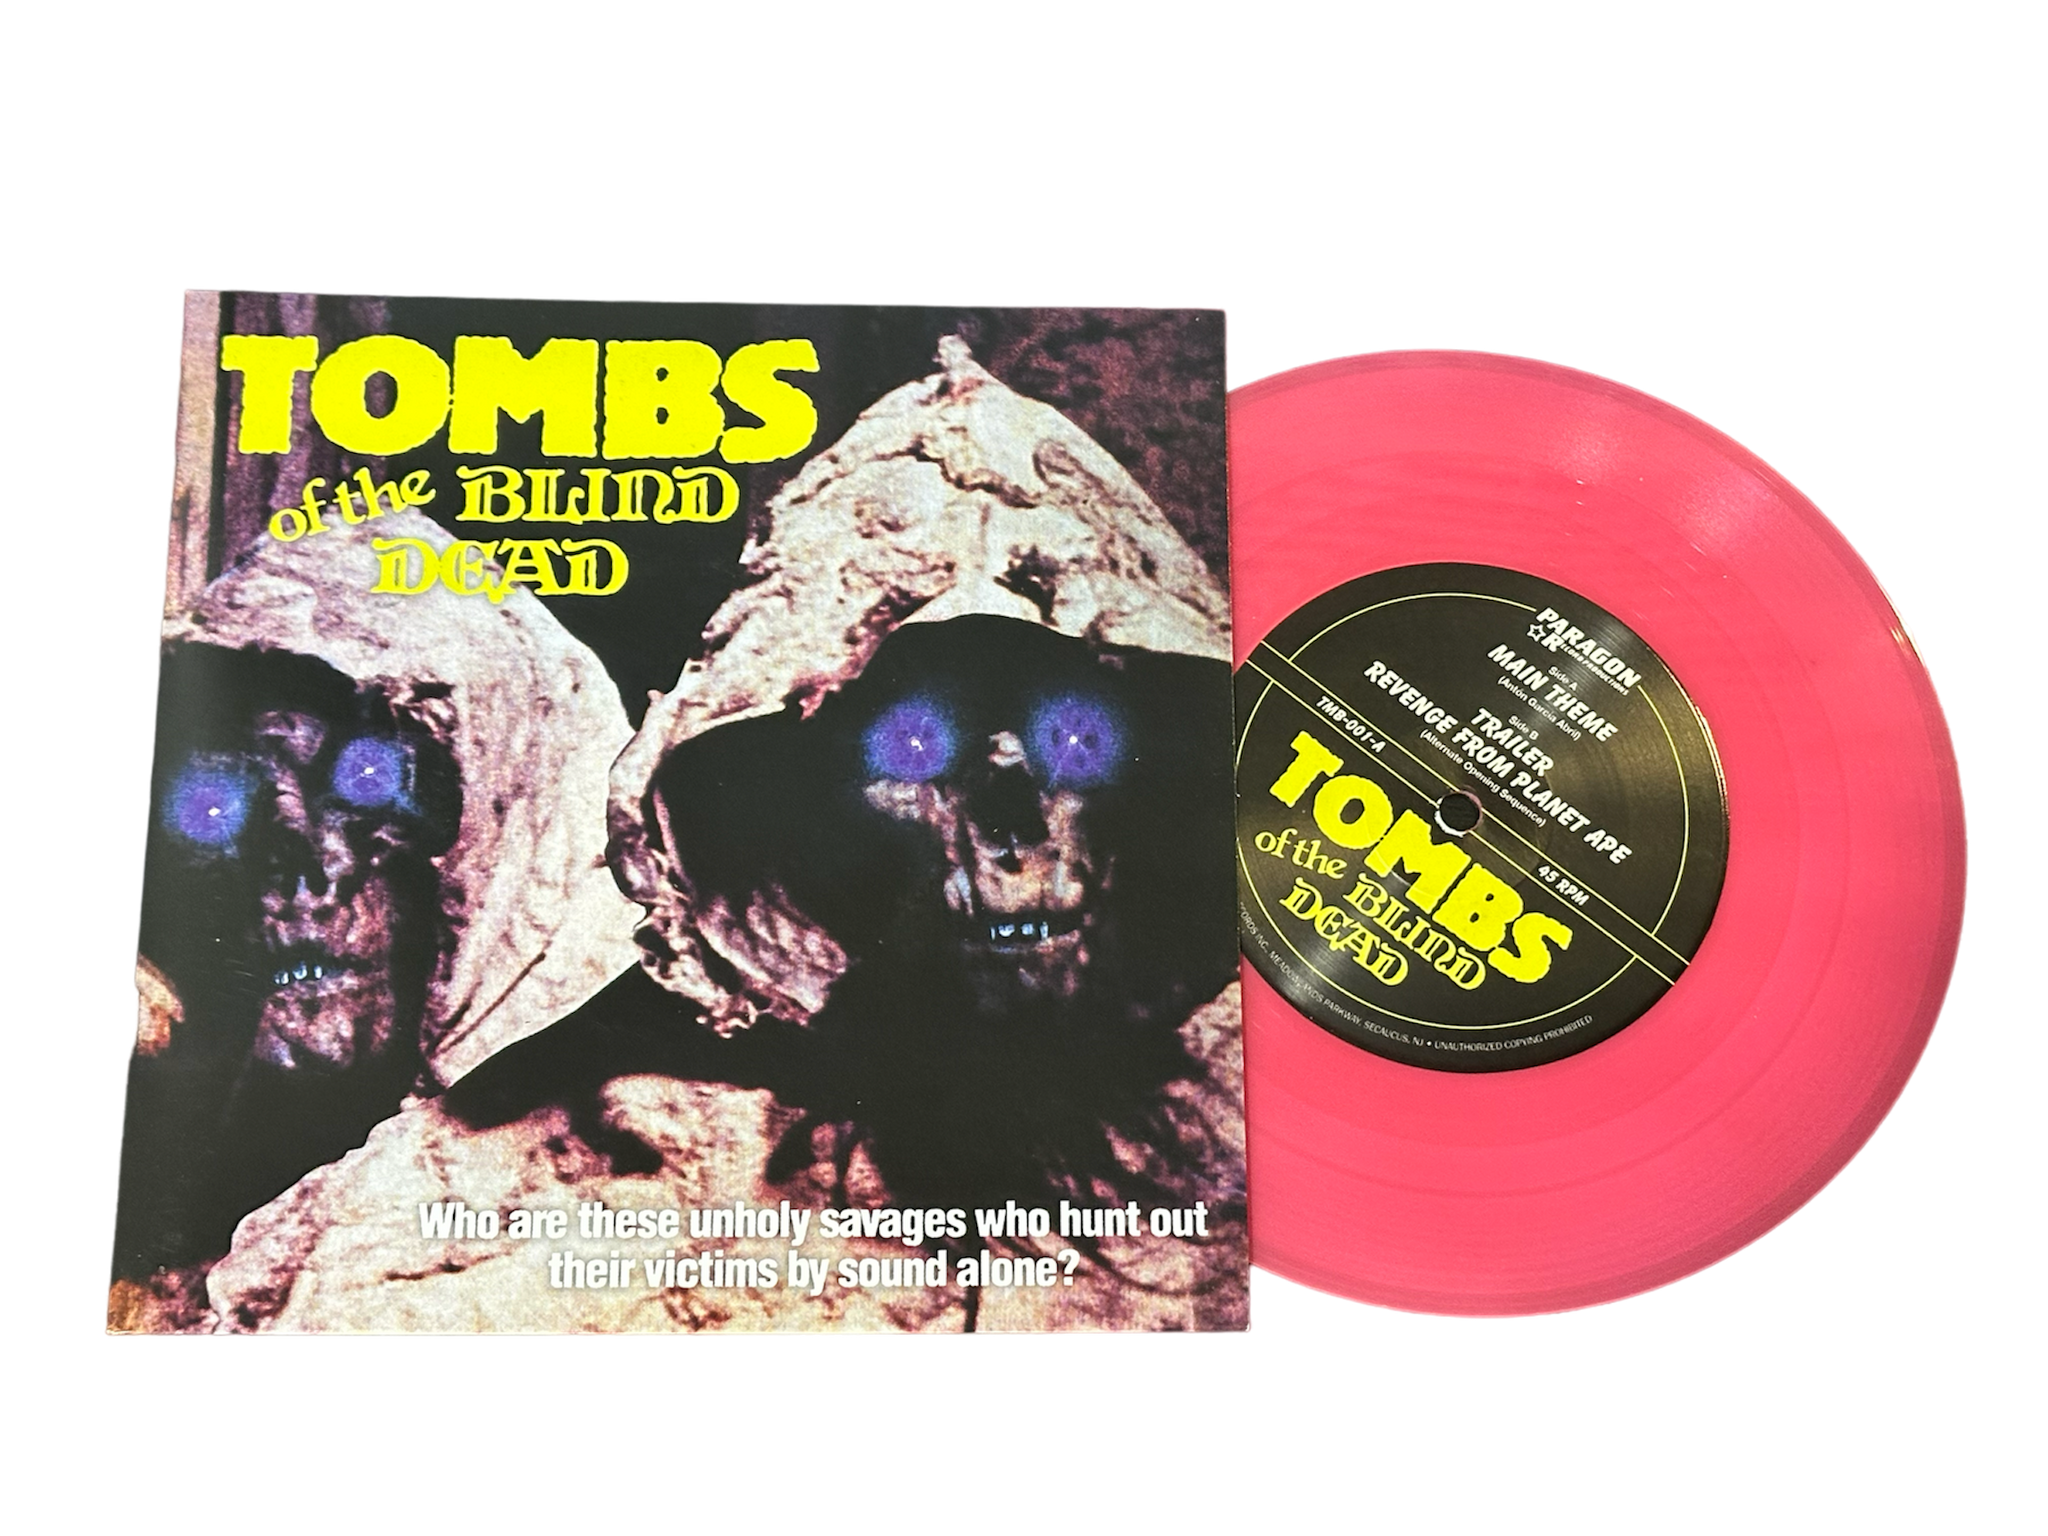 REGAL RECORDS - TOMBS OF THE BLIND DEAD 7" VINYL RECORD